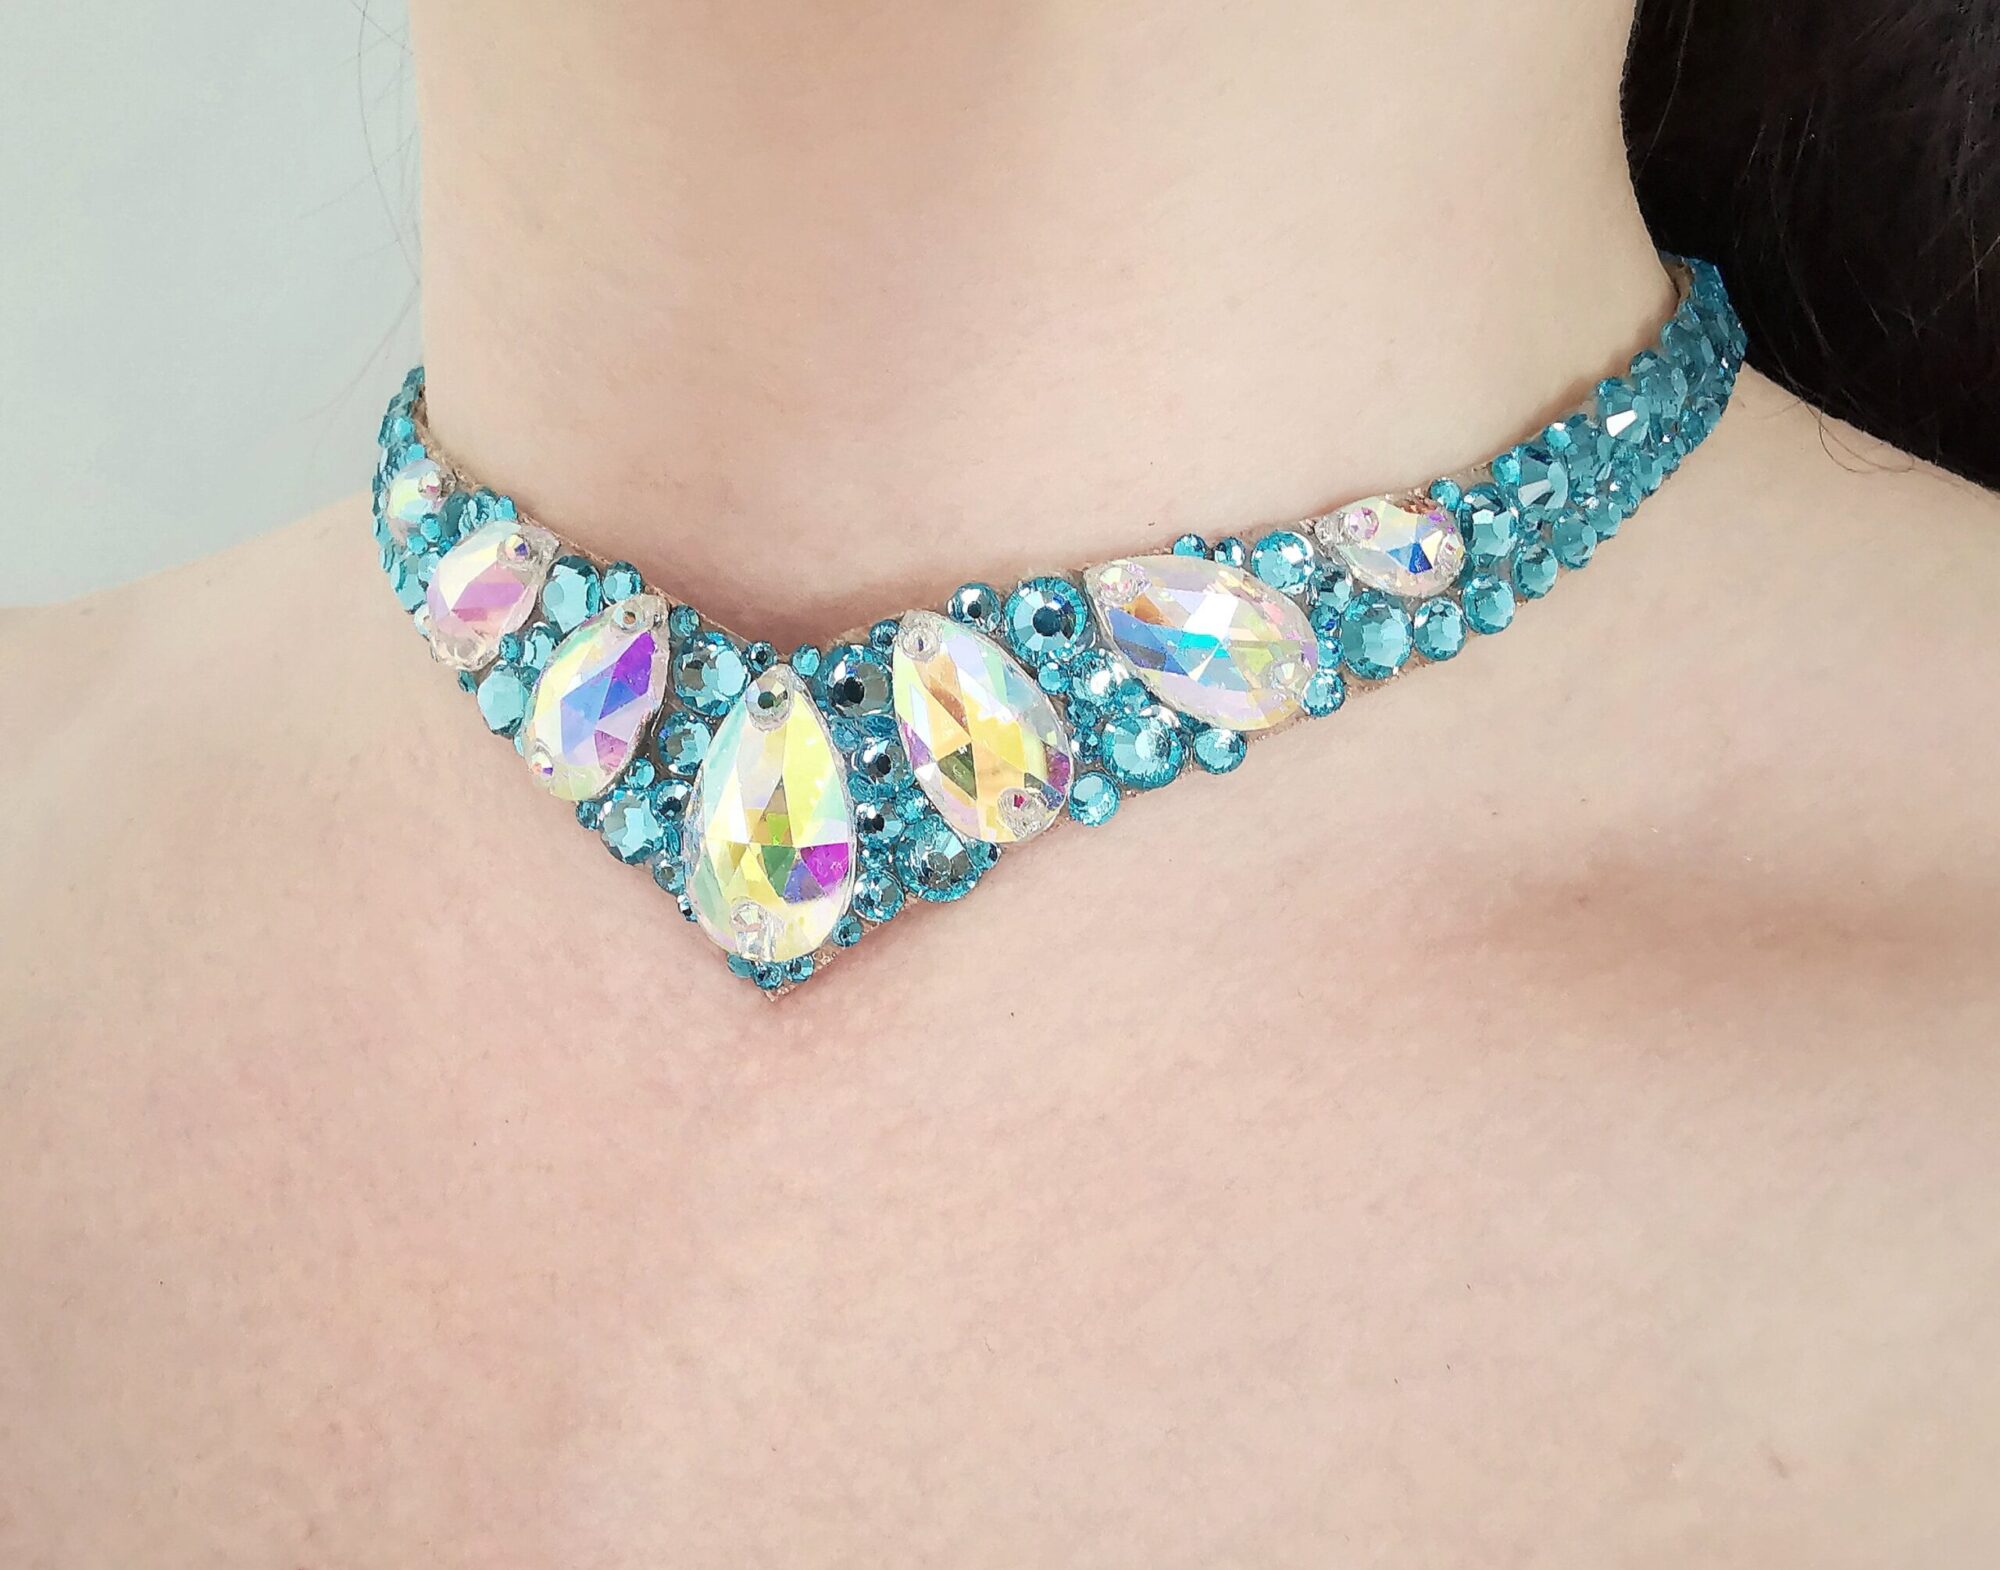 Ballroom competition necklace with blue aqua crystals